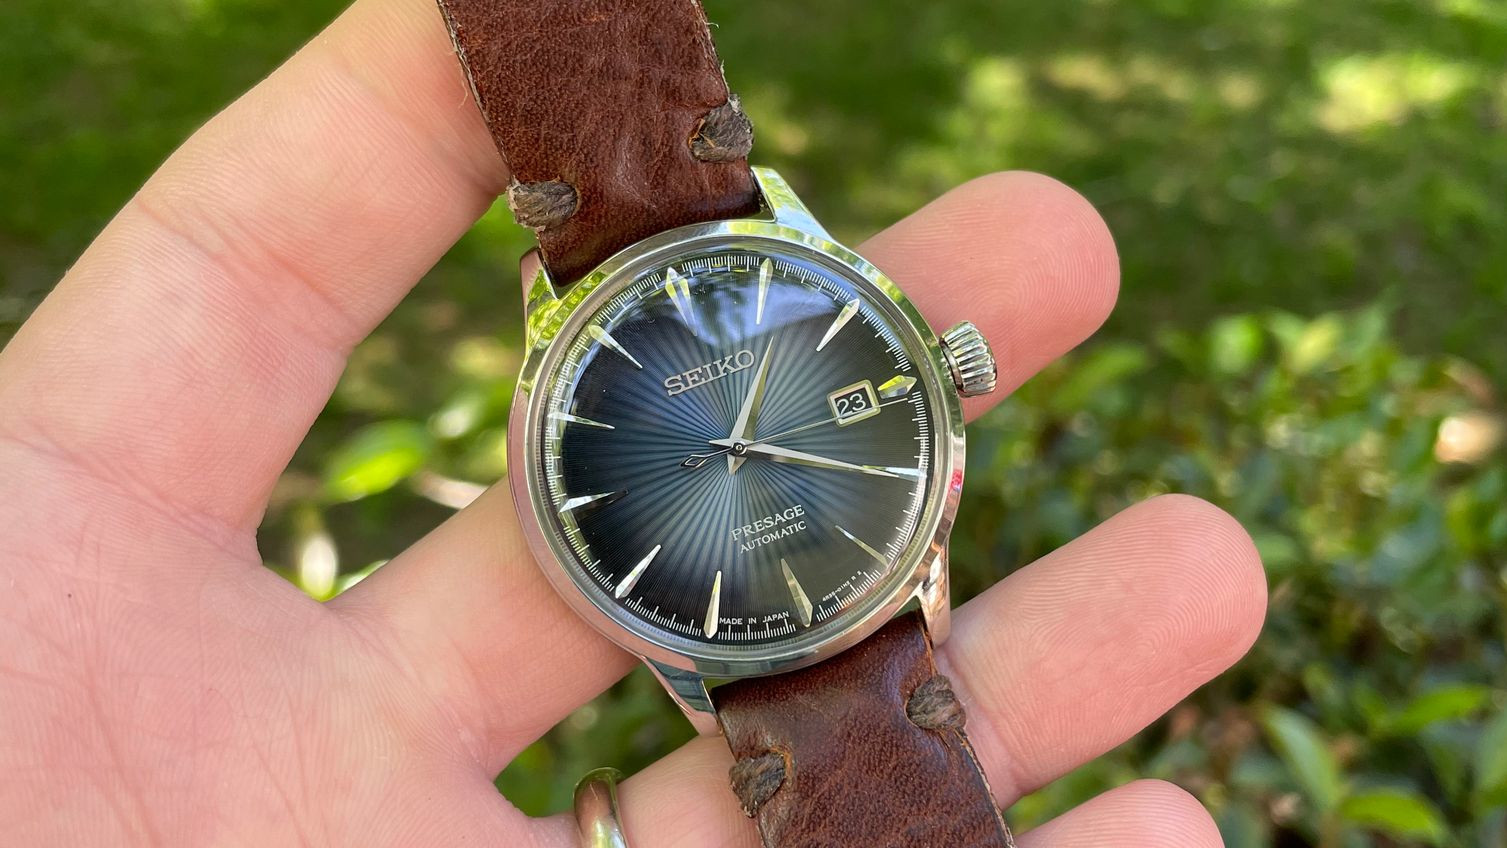 Cut or Carry: Seiko Presage SRPB41 ​”Cocktail Time” Review | Bench Reviews